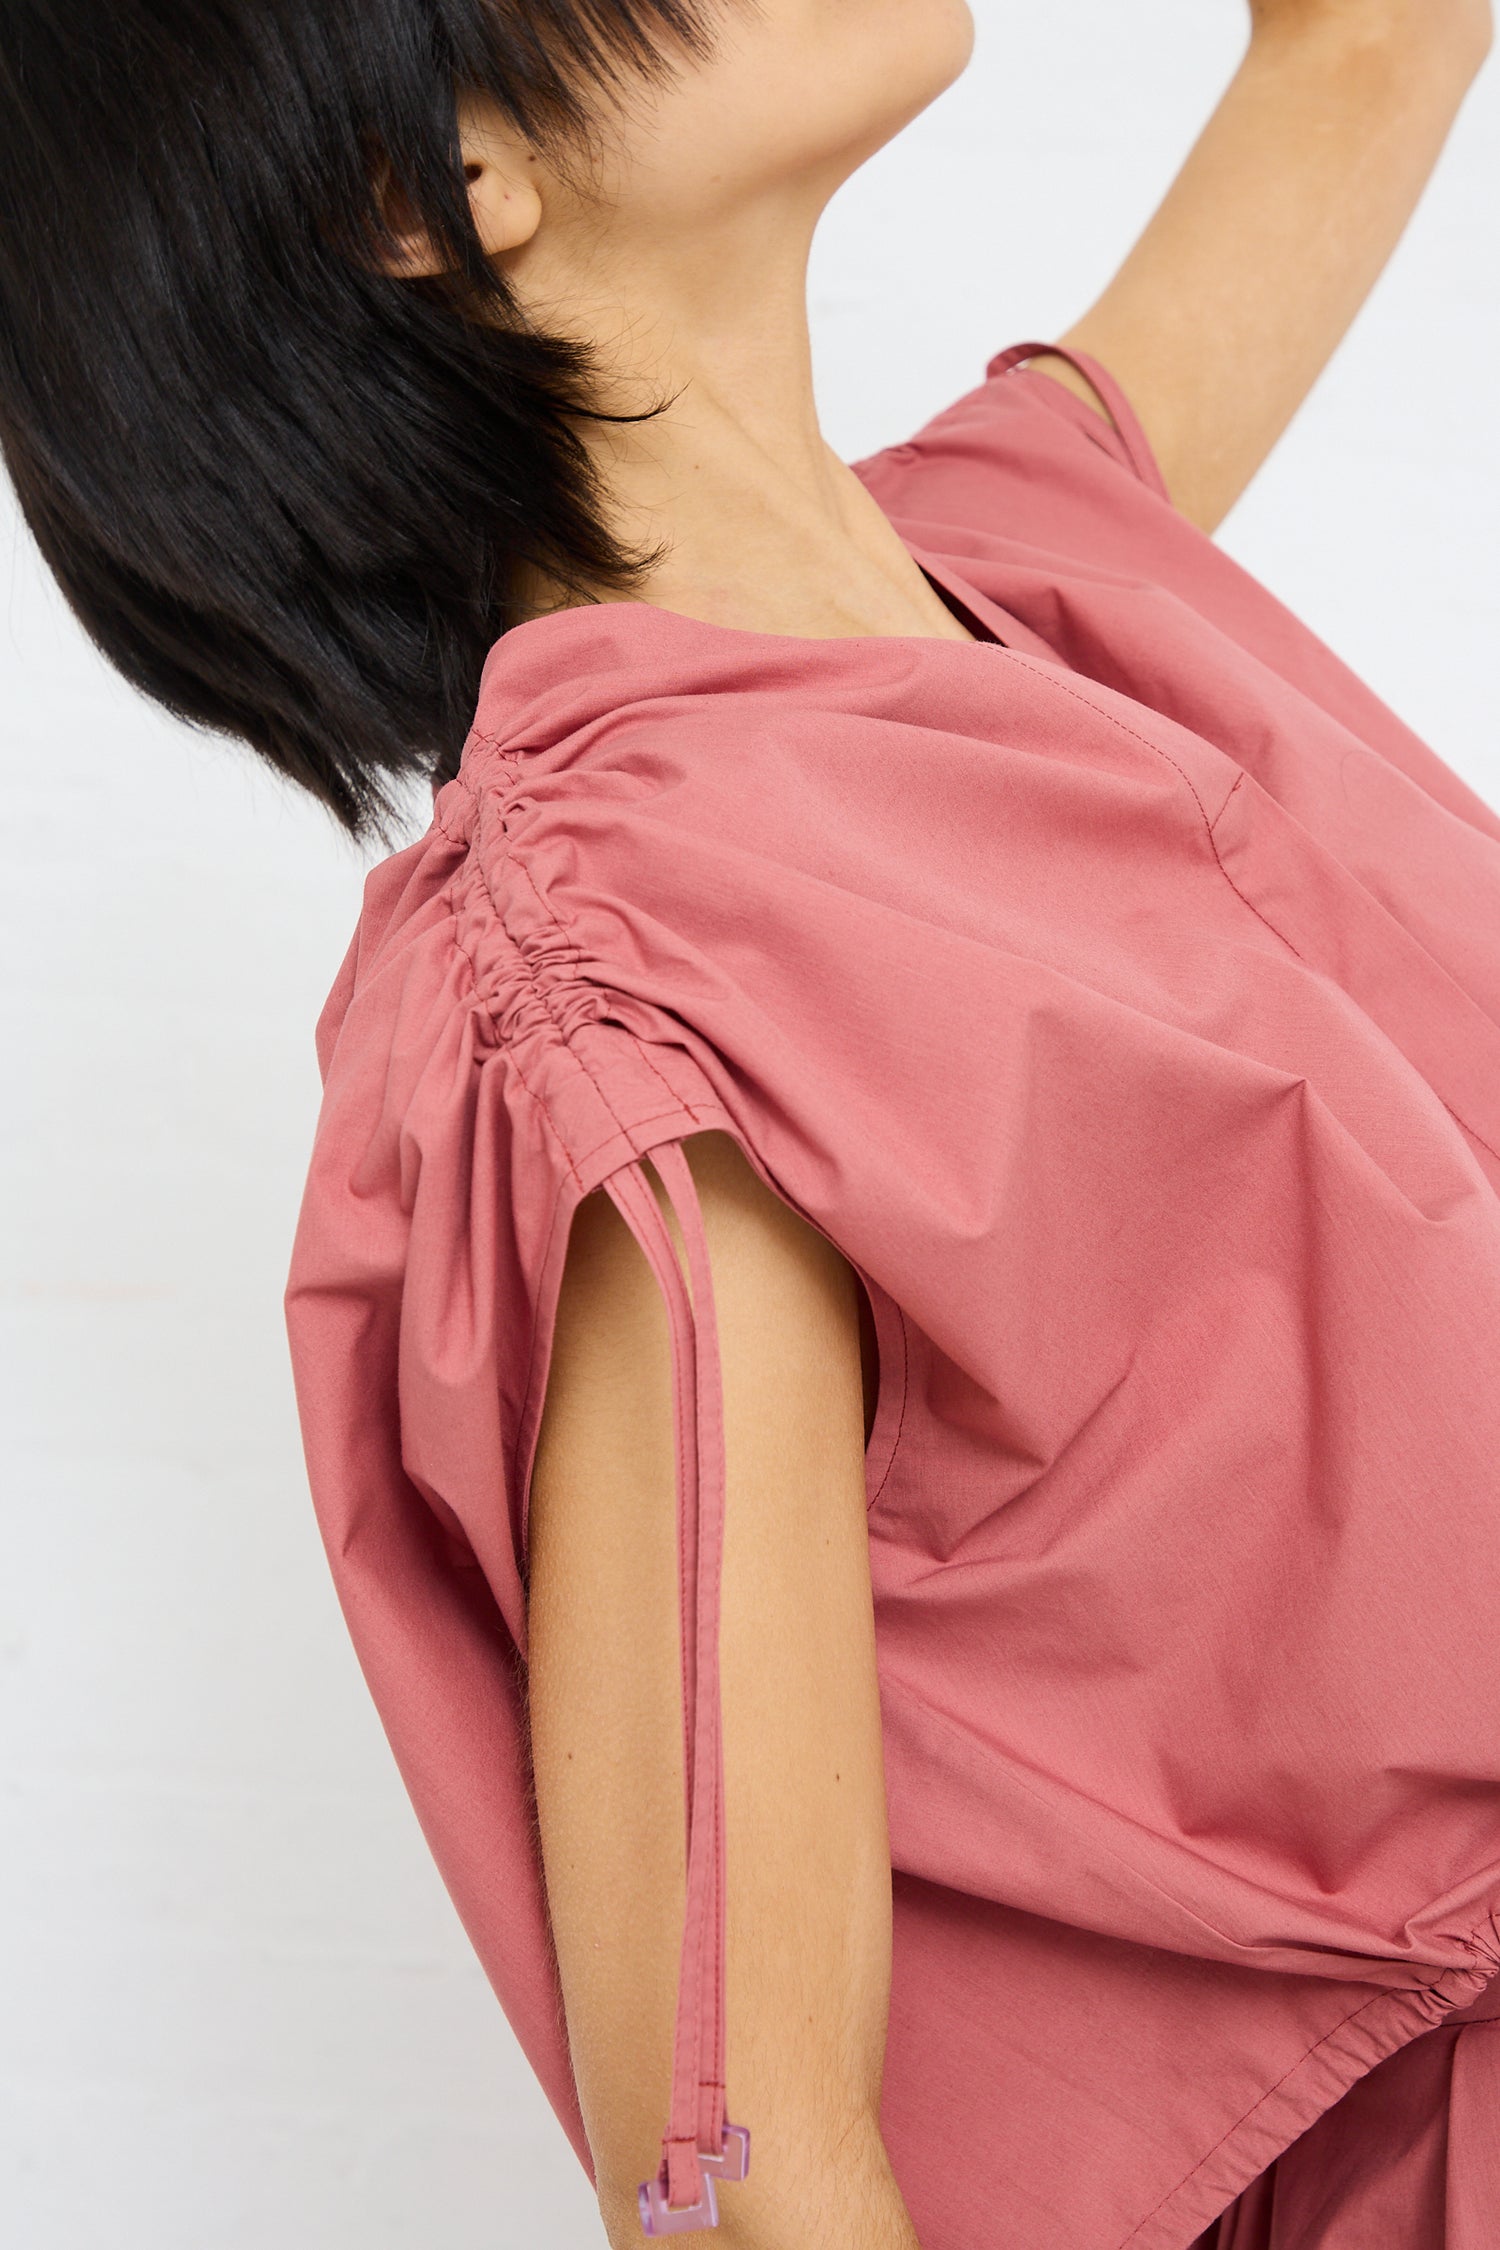 A person in a Cotton Poplin Gathered Top in Canyon by Veronique Leroy with adjustable ruche detail at the shoulder and a visible zipper.